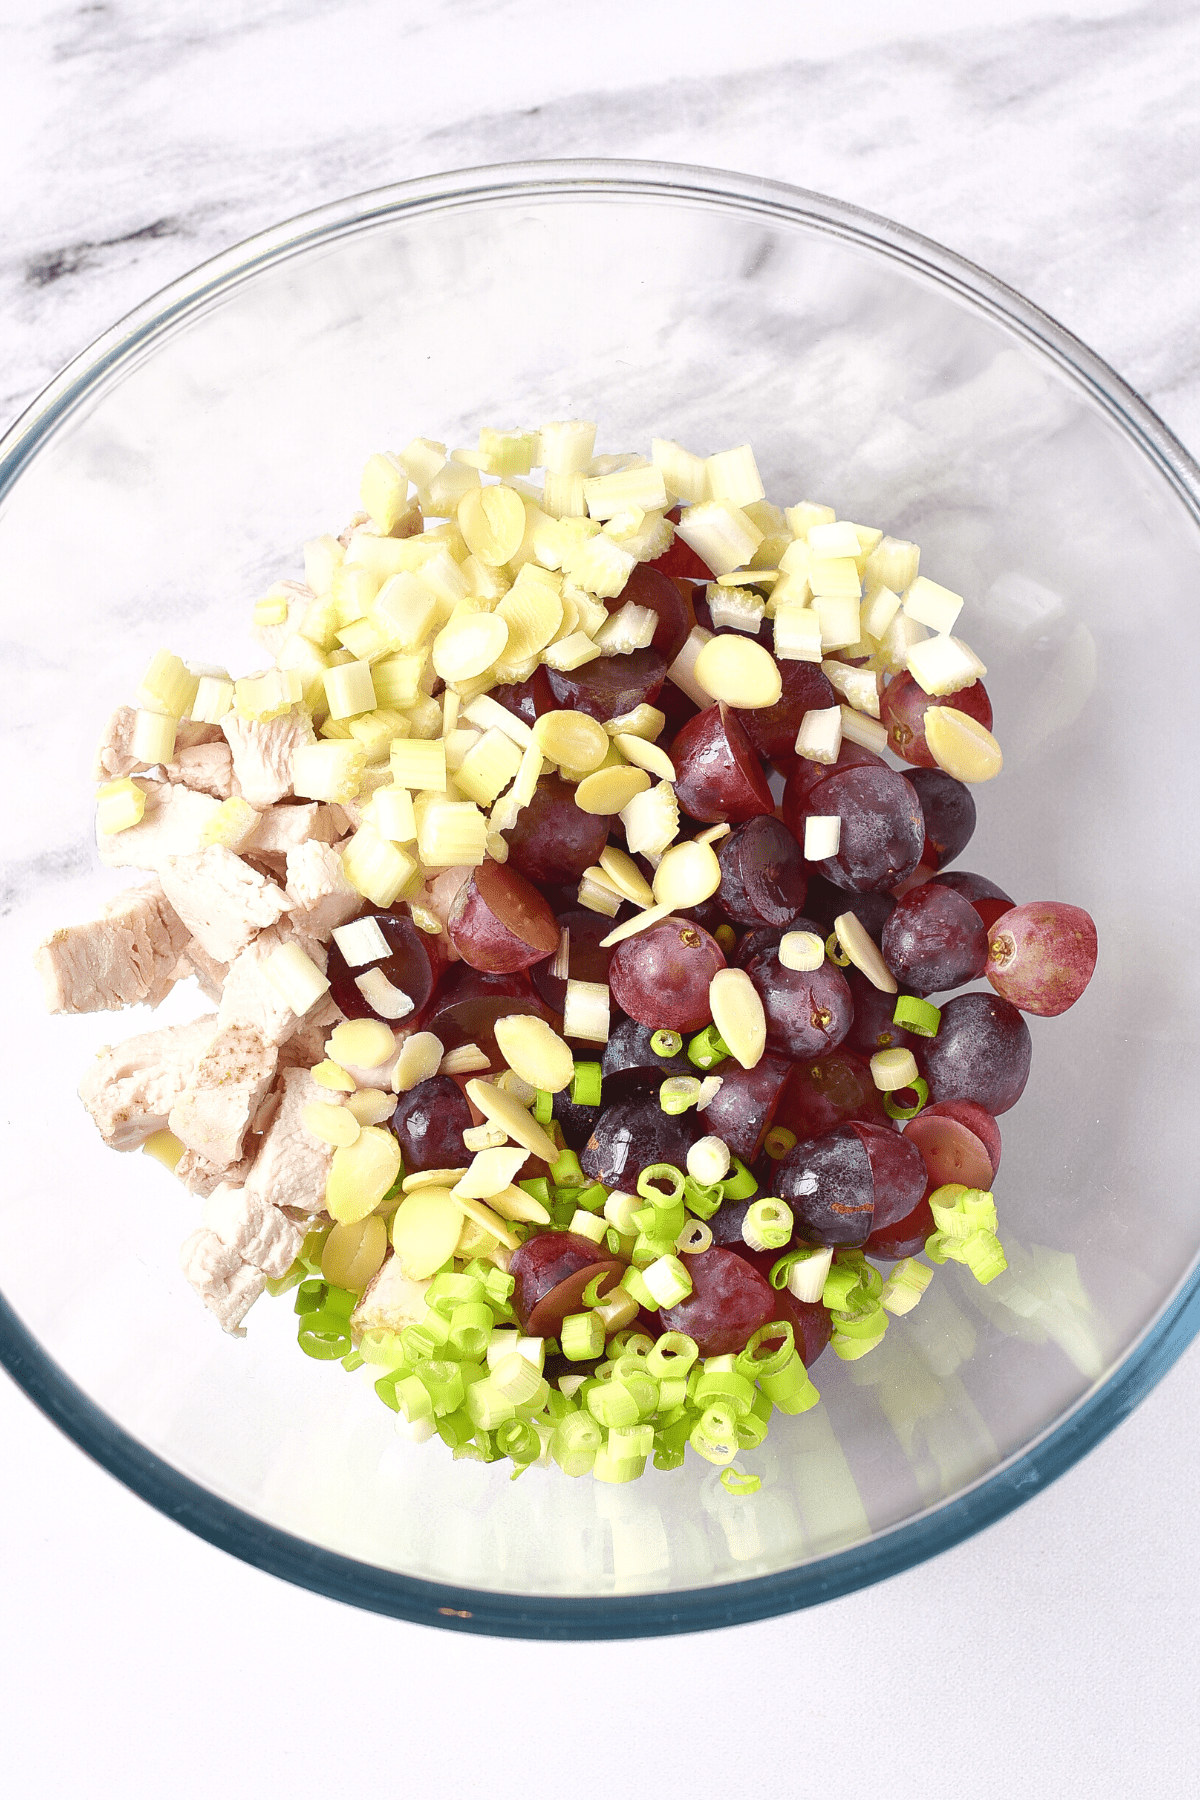 Chicken, grapes, celery, sliced almonds, and spring onions in a glass mixing bowl.